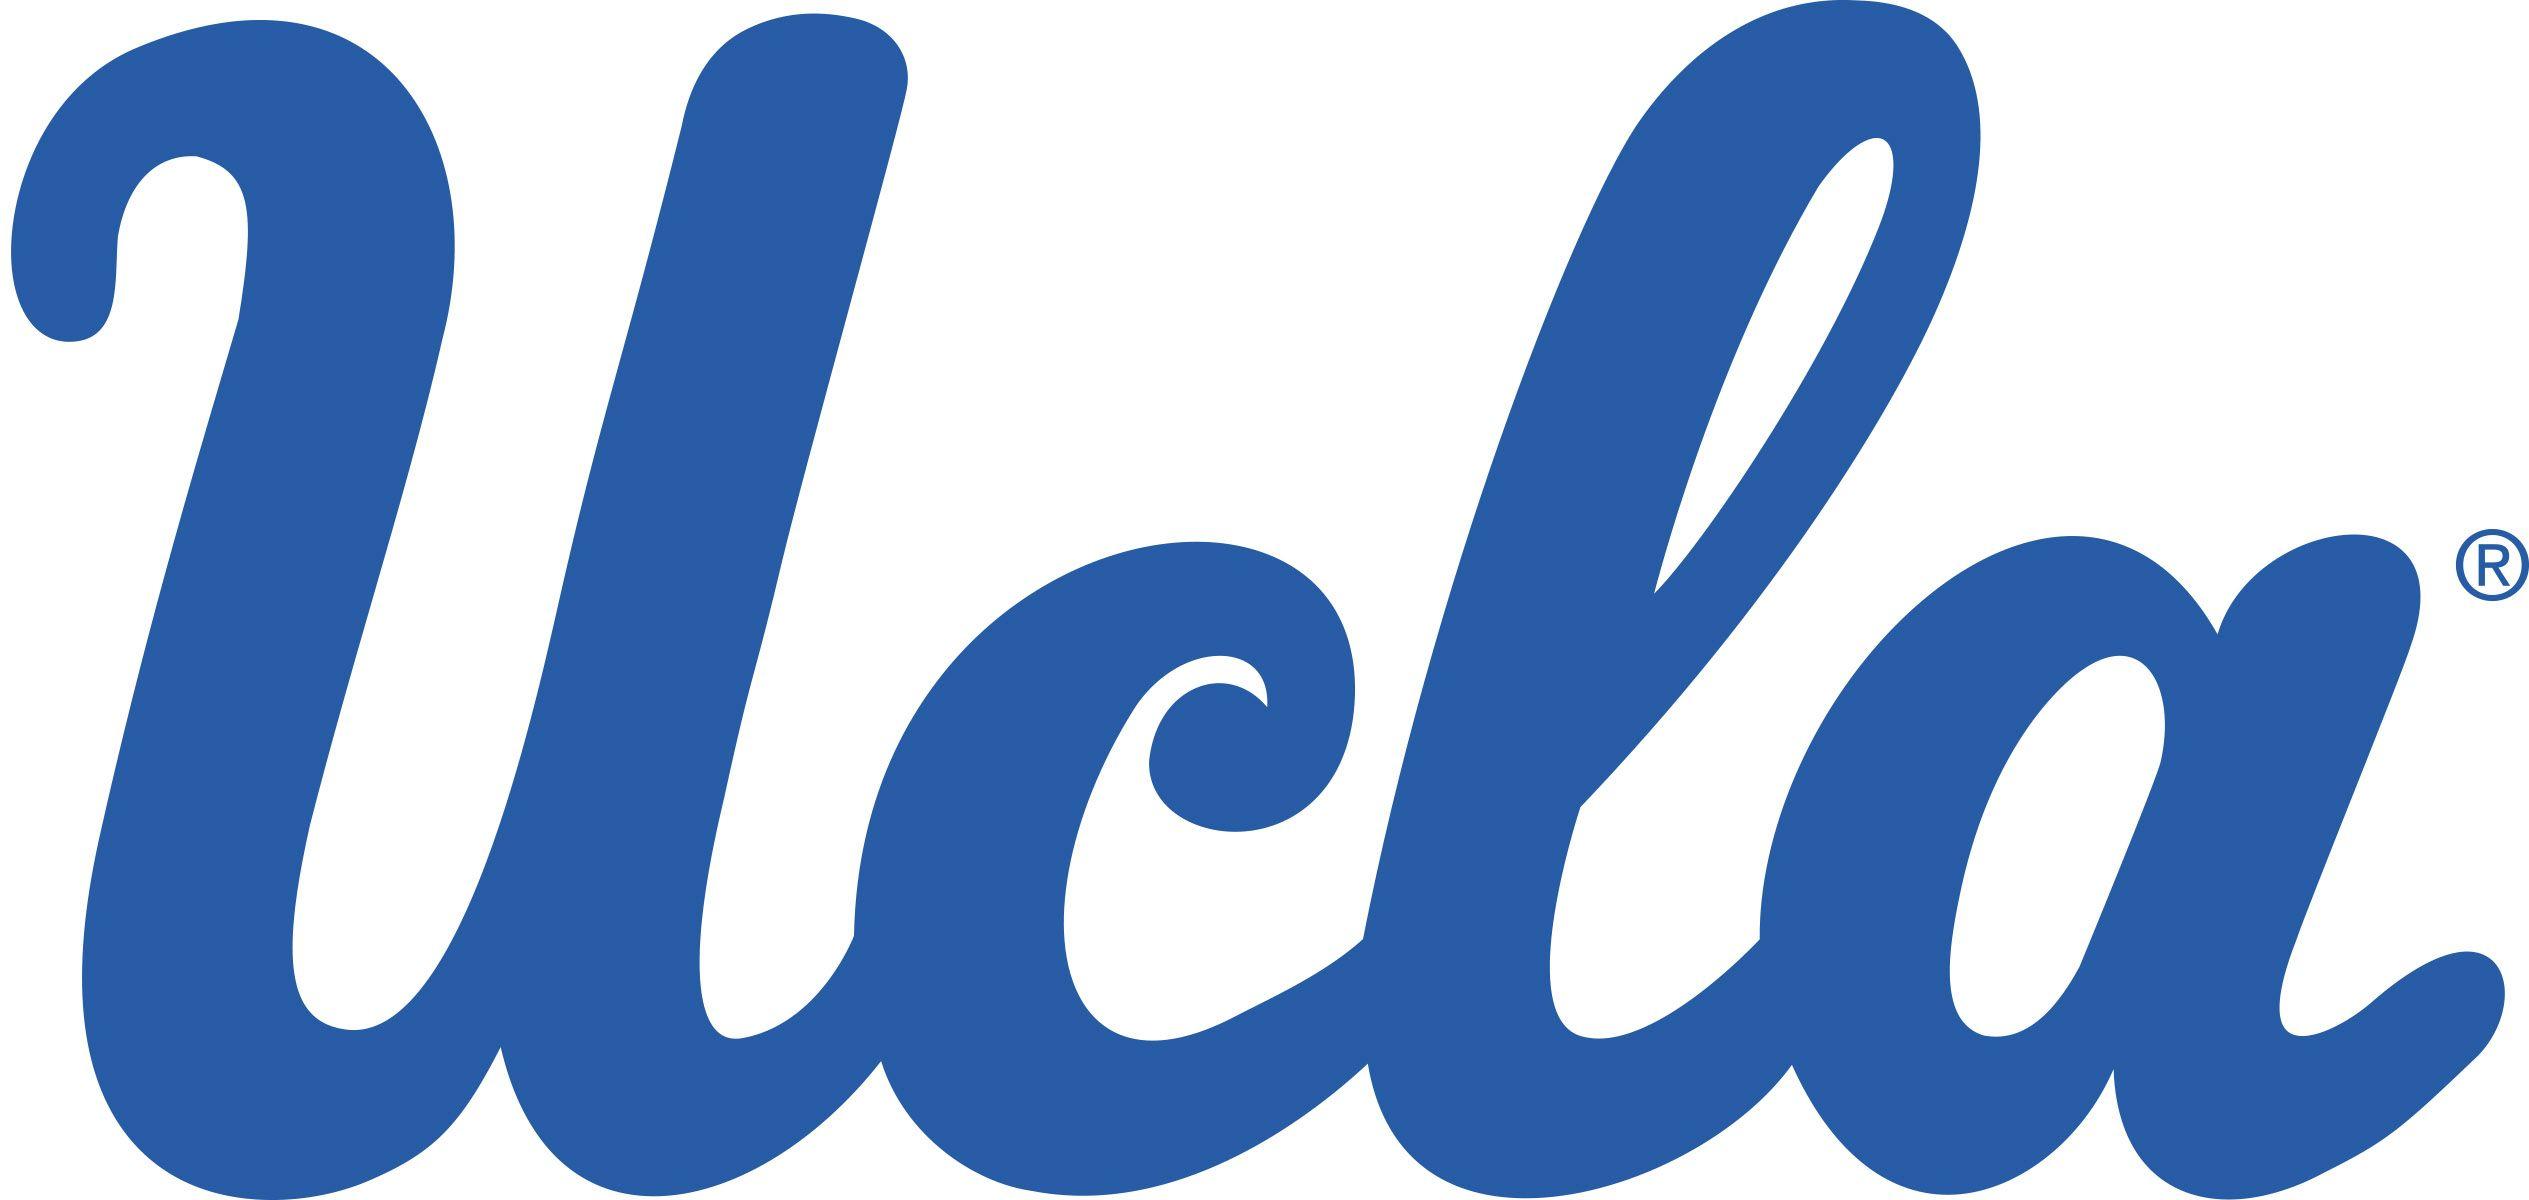 UCLA Logo - UCLA releases updated logo, colors before Under Armour debut ...